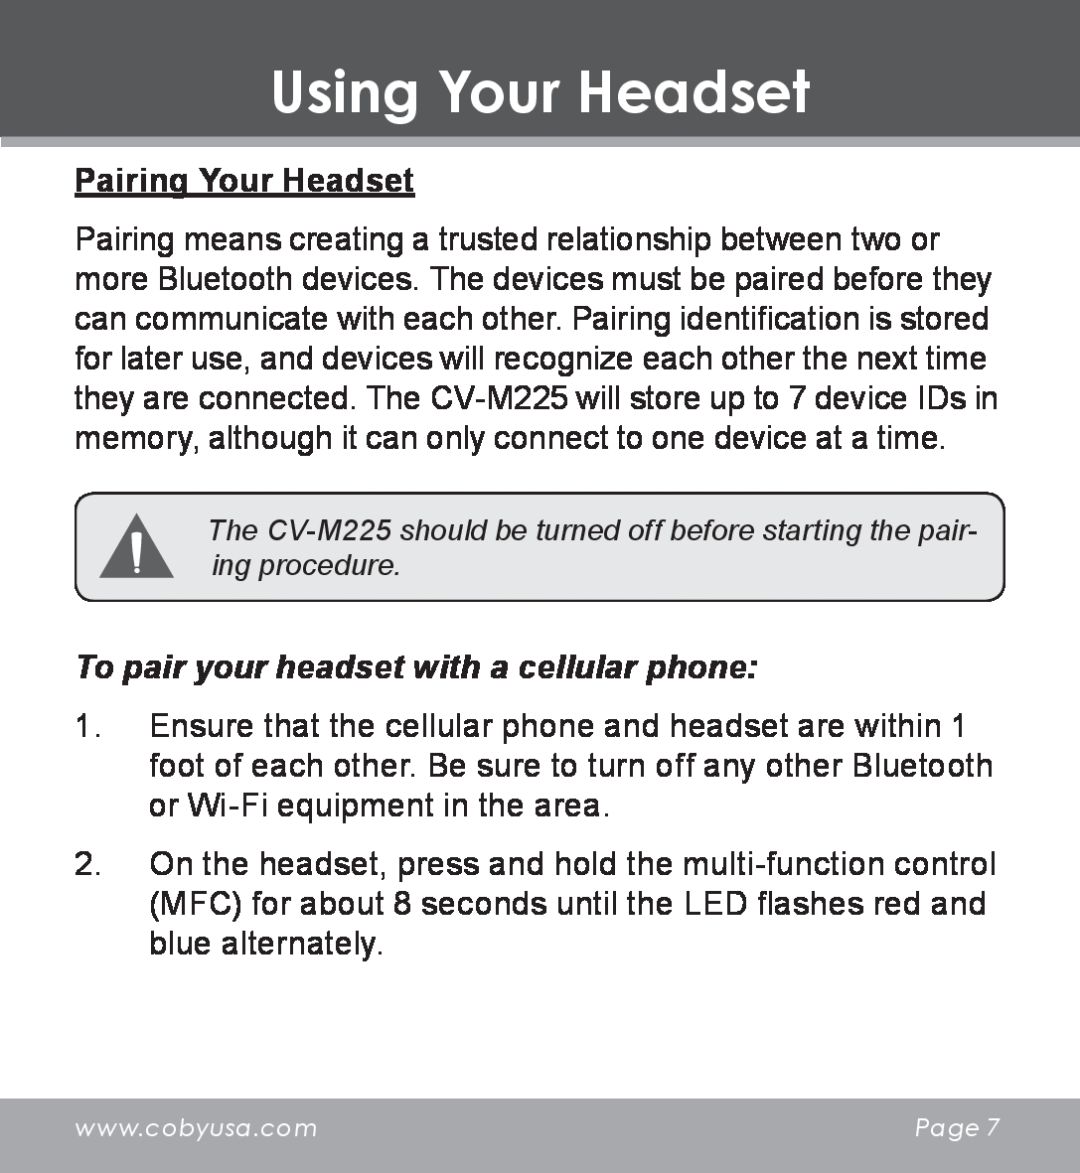 COBY electronic CV-M225 instruction manual Using Your Headset, Pairing Your Headset 